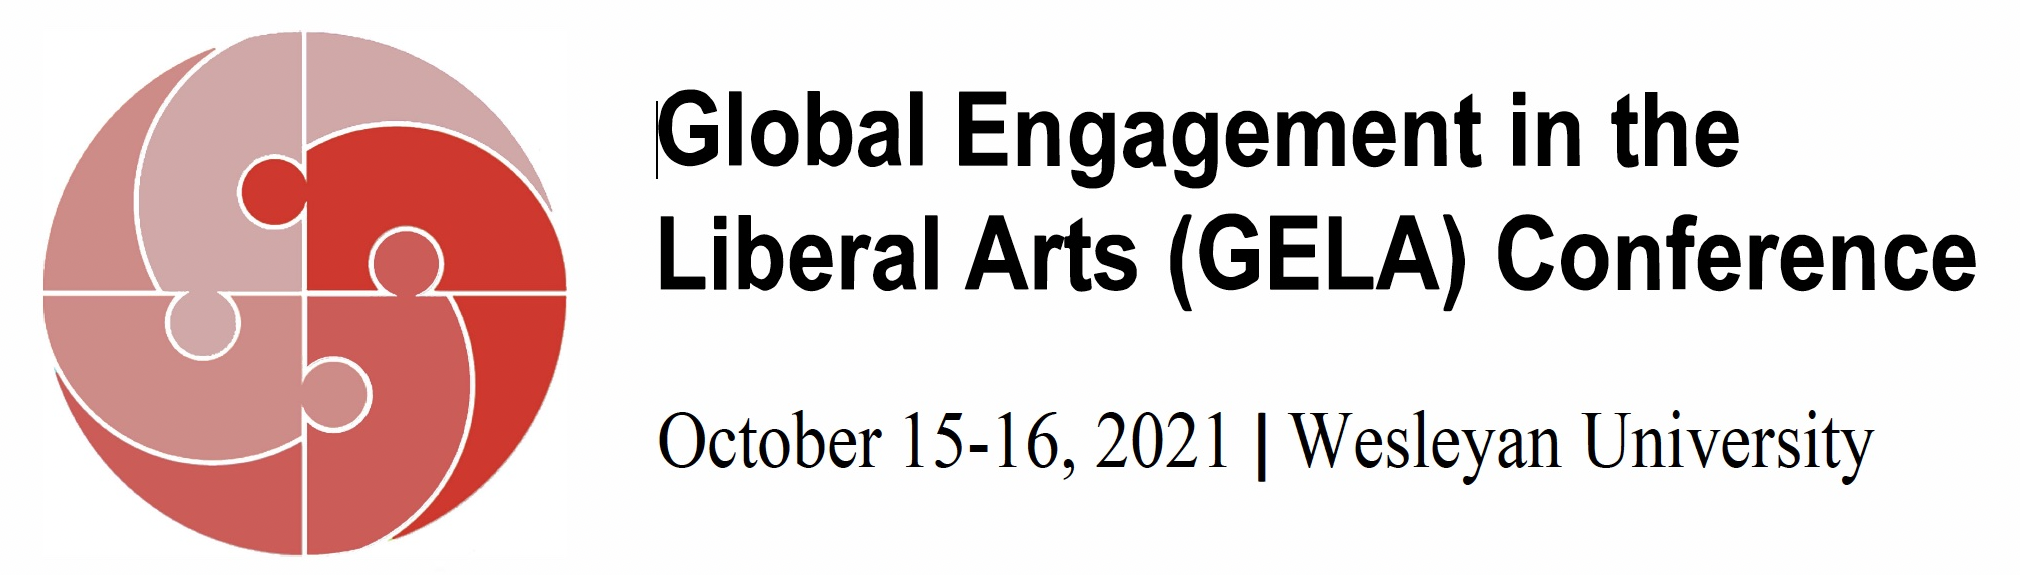 Global Engagement in the Liberal Arts Conference